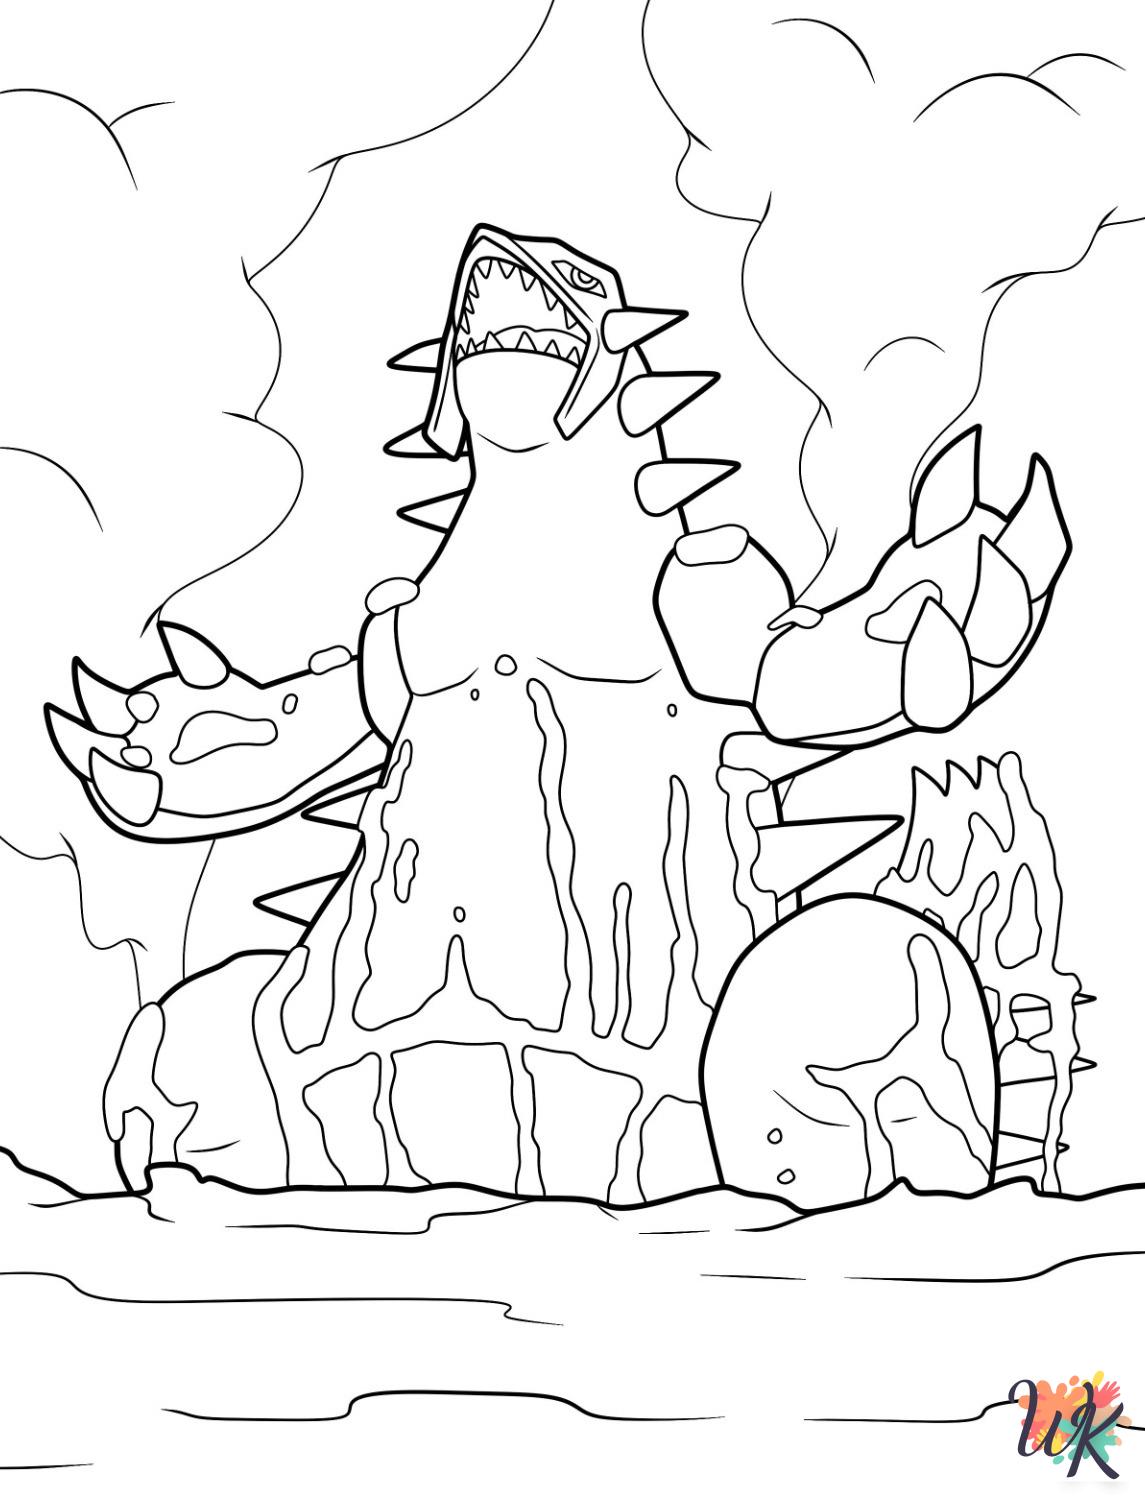 Legendary Pokemon coloring pages for preschoolers